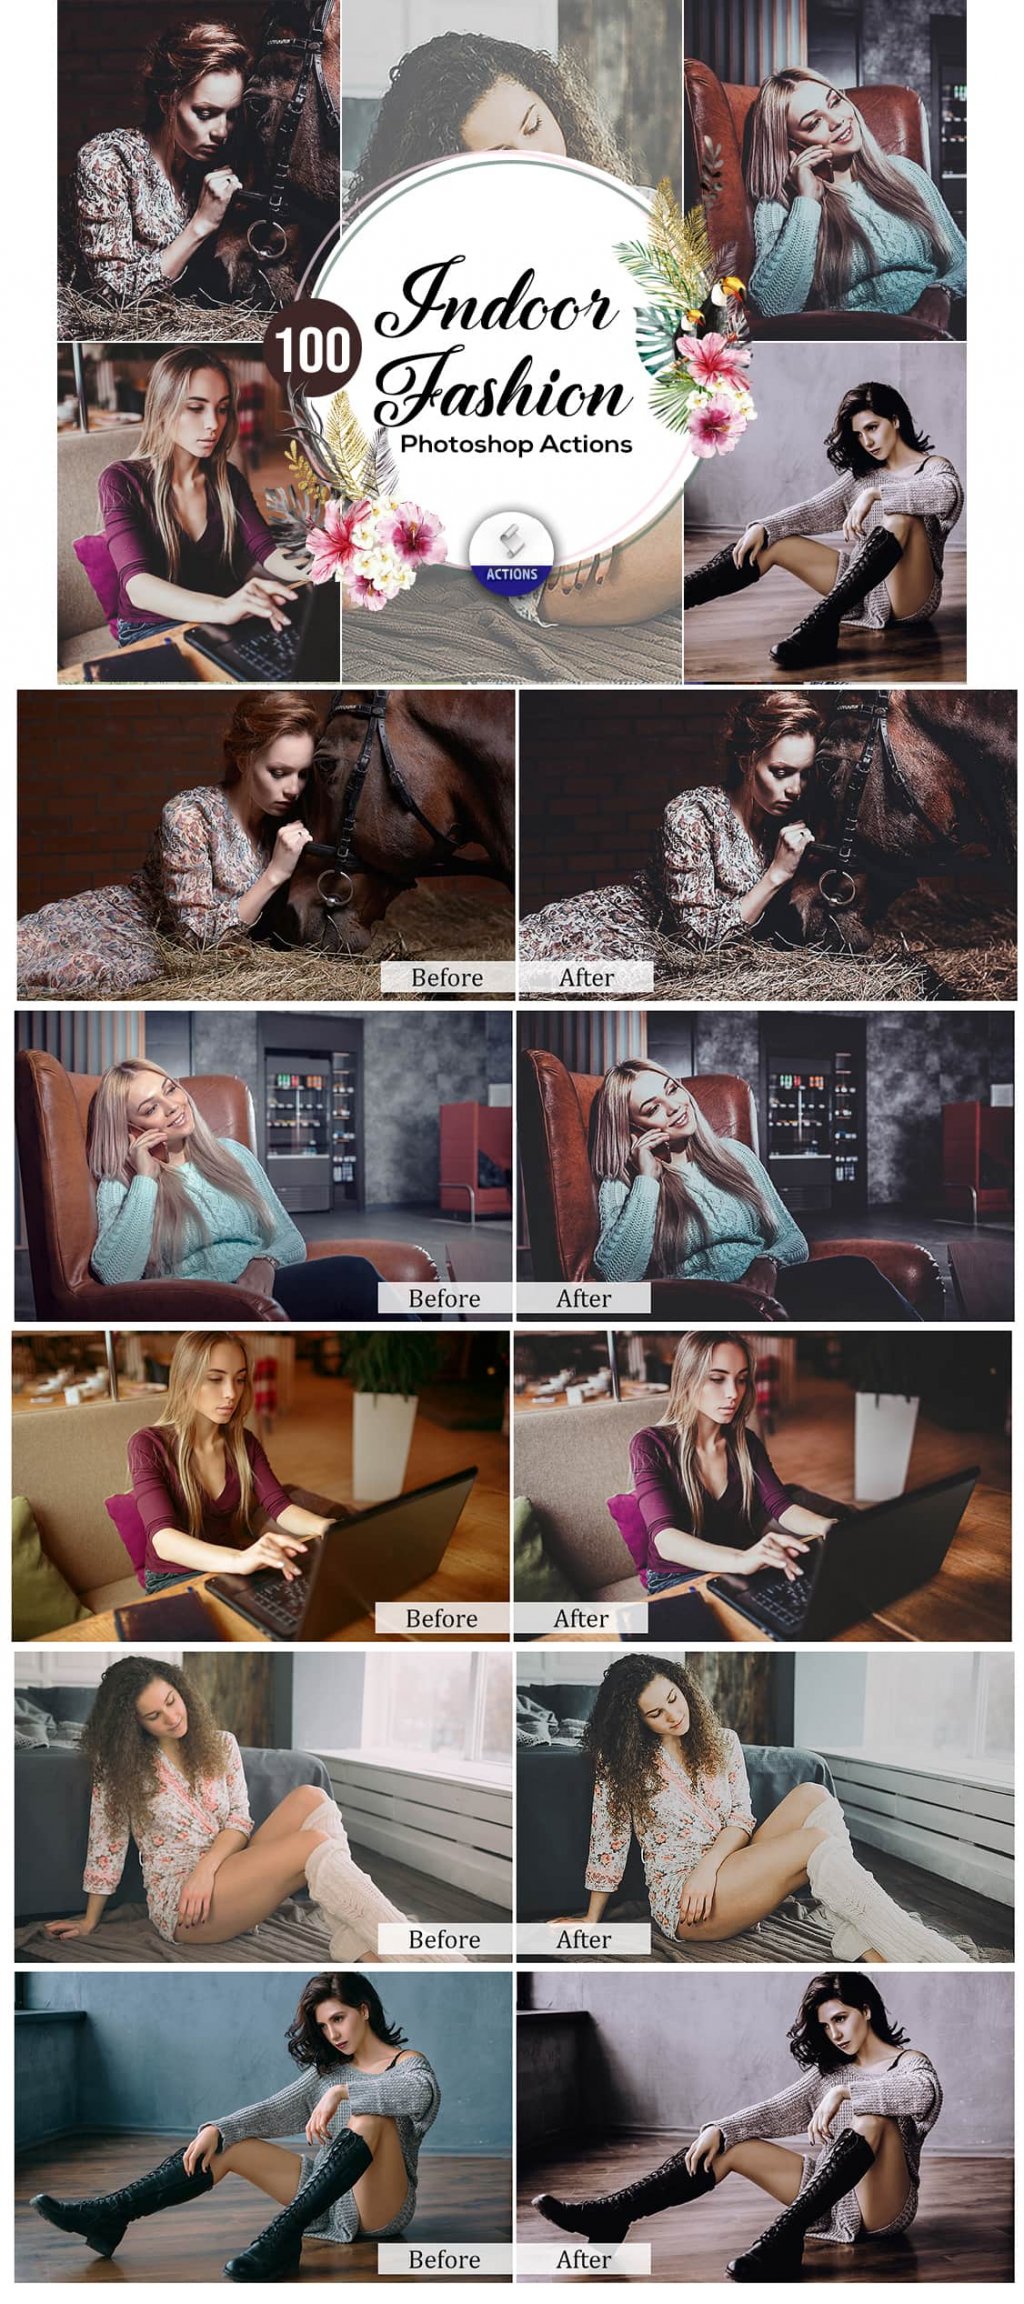 Indoor fashion photoshop actions